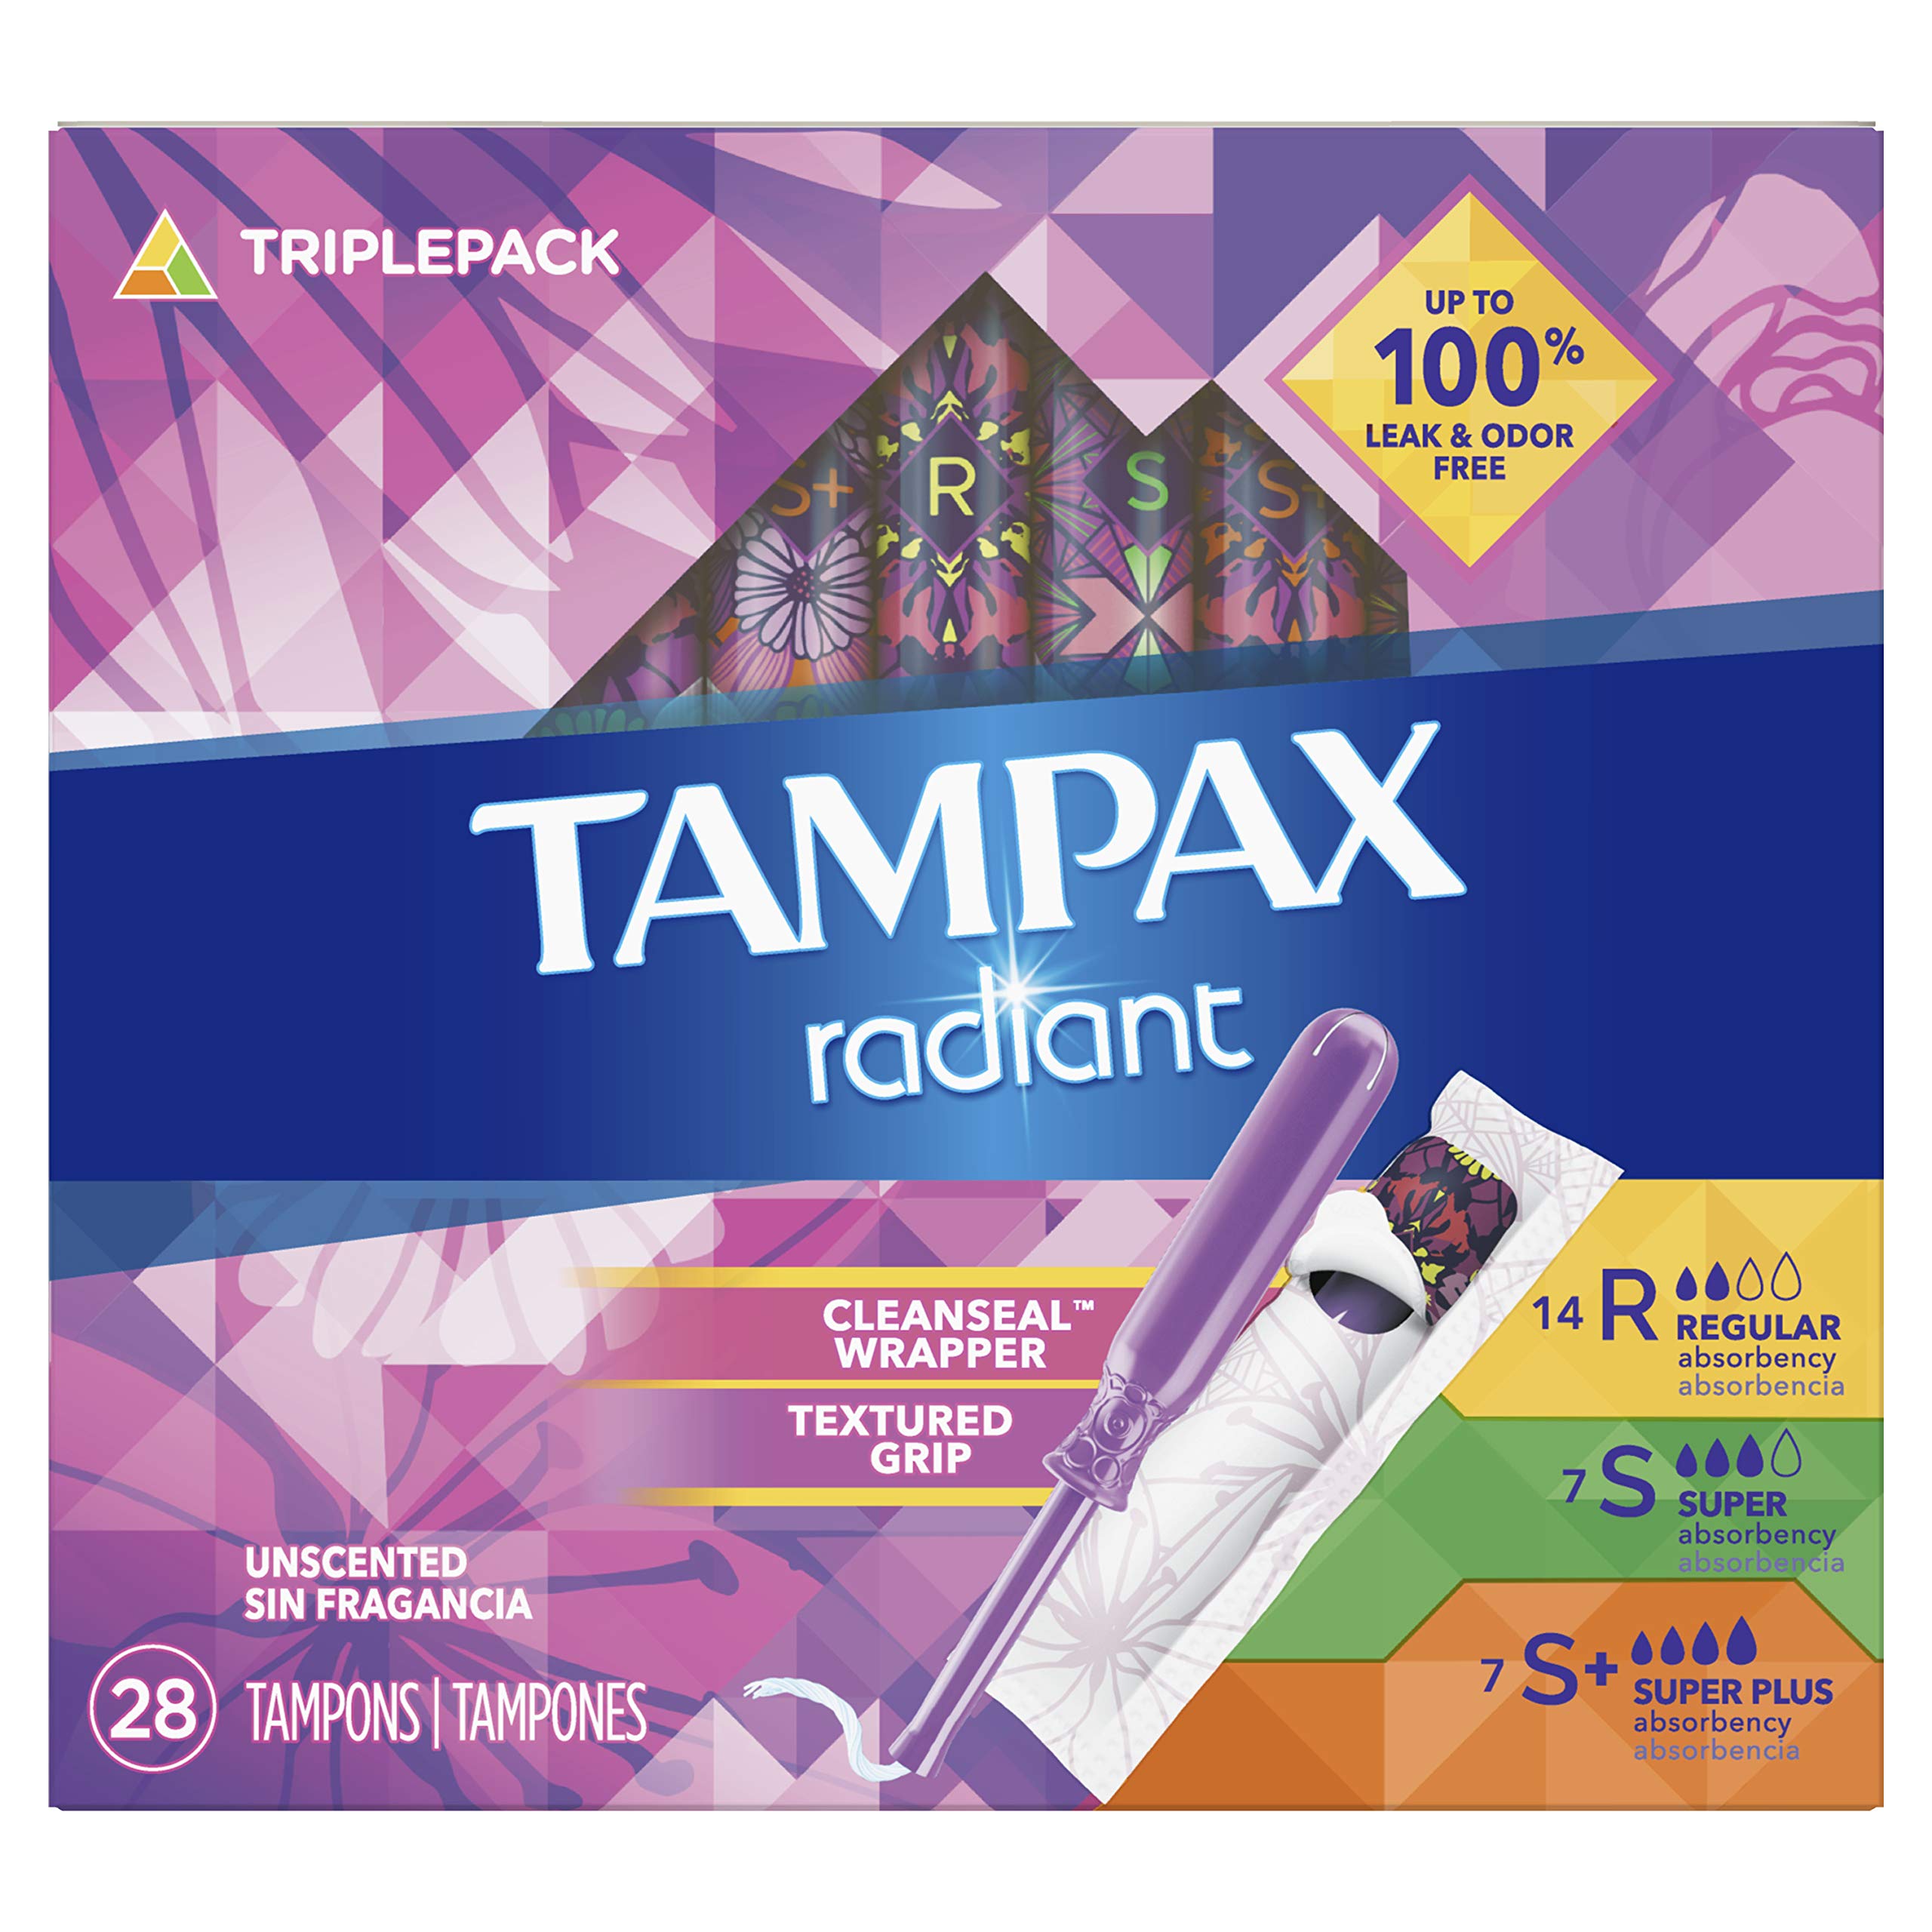 Tampax Radiant Tampons Trio Pack Regular/Super/Super Plus Absorbency  Unscented 28 Count